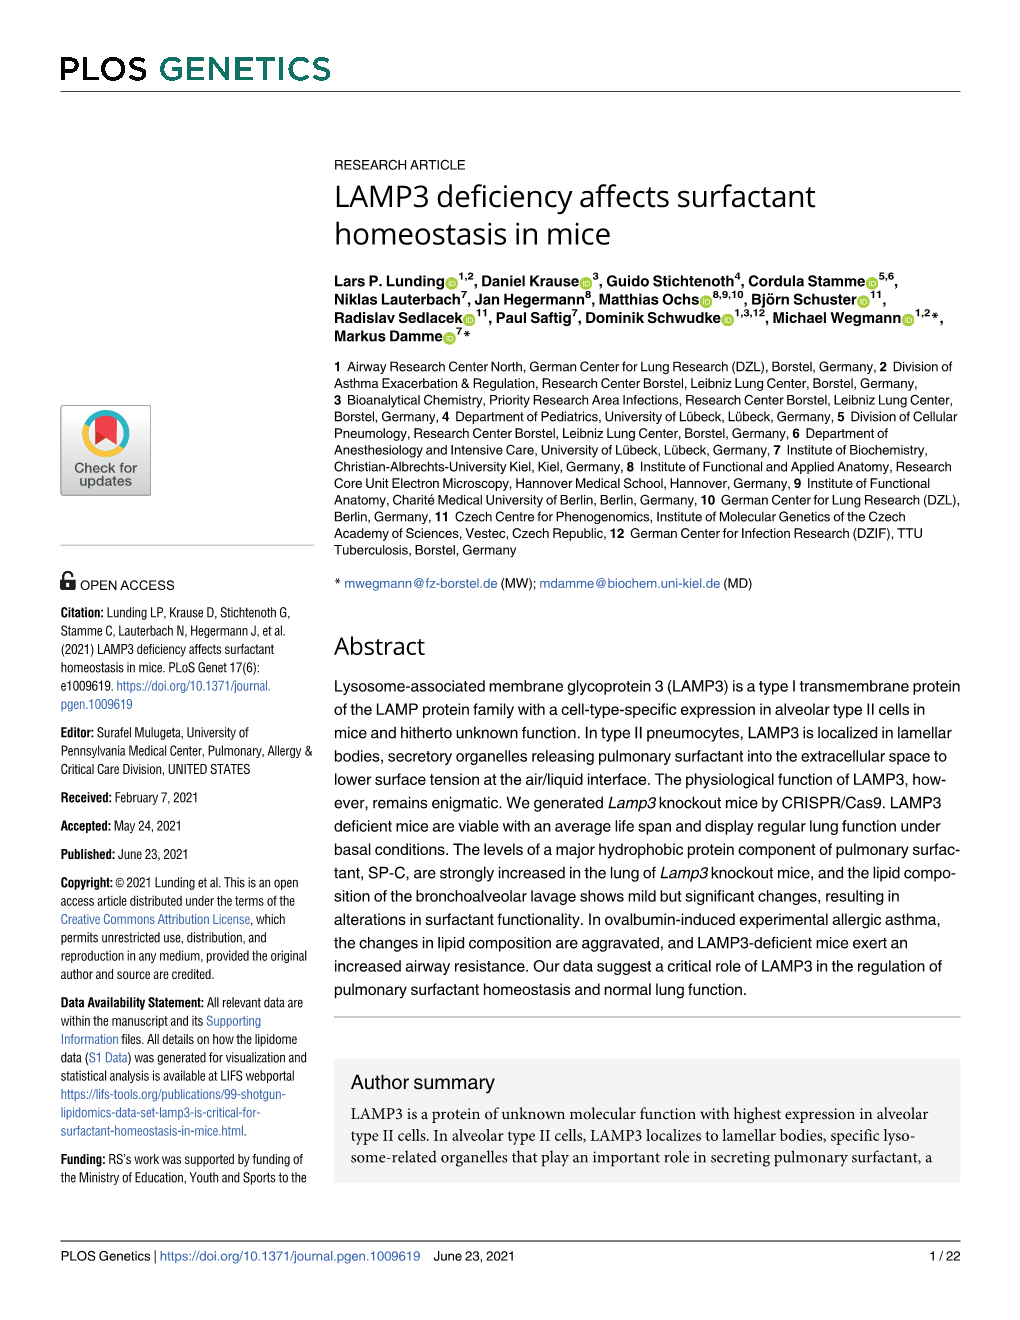 LAMP3 Deficiency Affects Surfactant Homeostasis in Mice